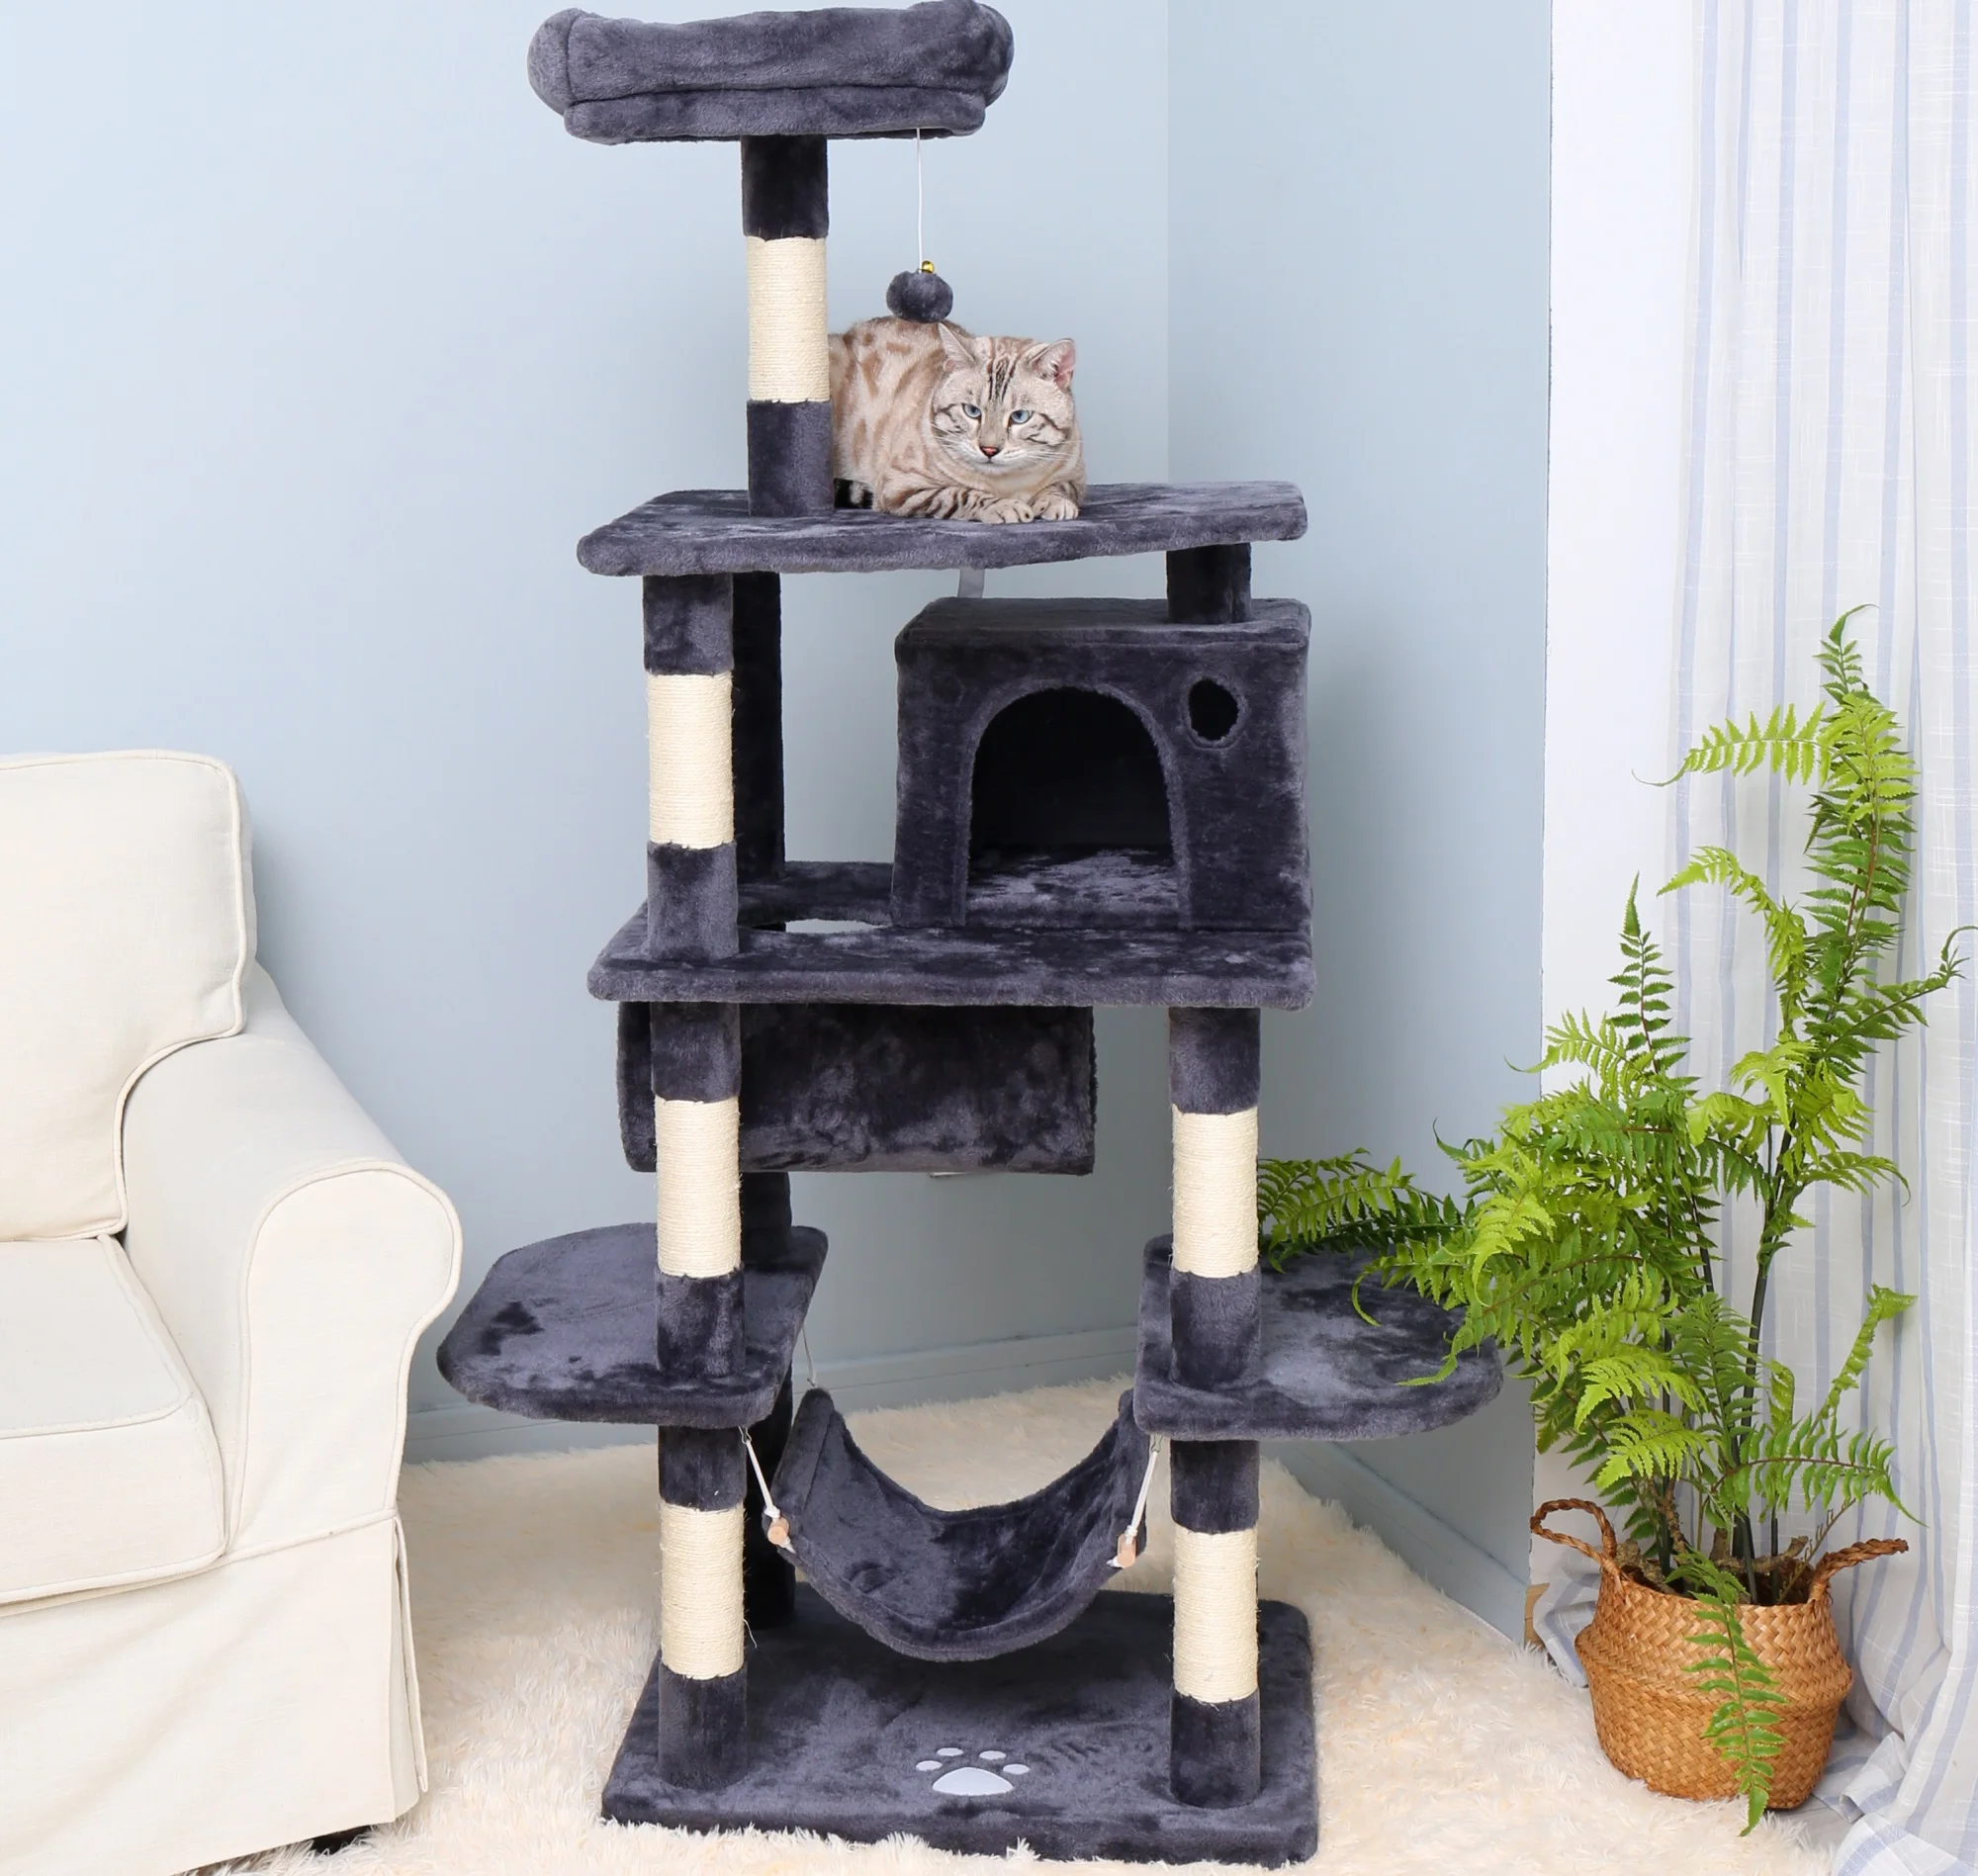 

NEW YG Cat Tree Condo Furniture Kitten Activity Tower Pet Kitty Play House with Scratching Posts Perch Hammock Tunnel Dark grey